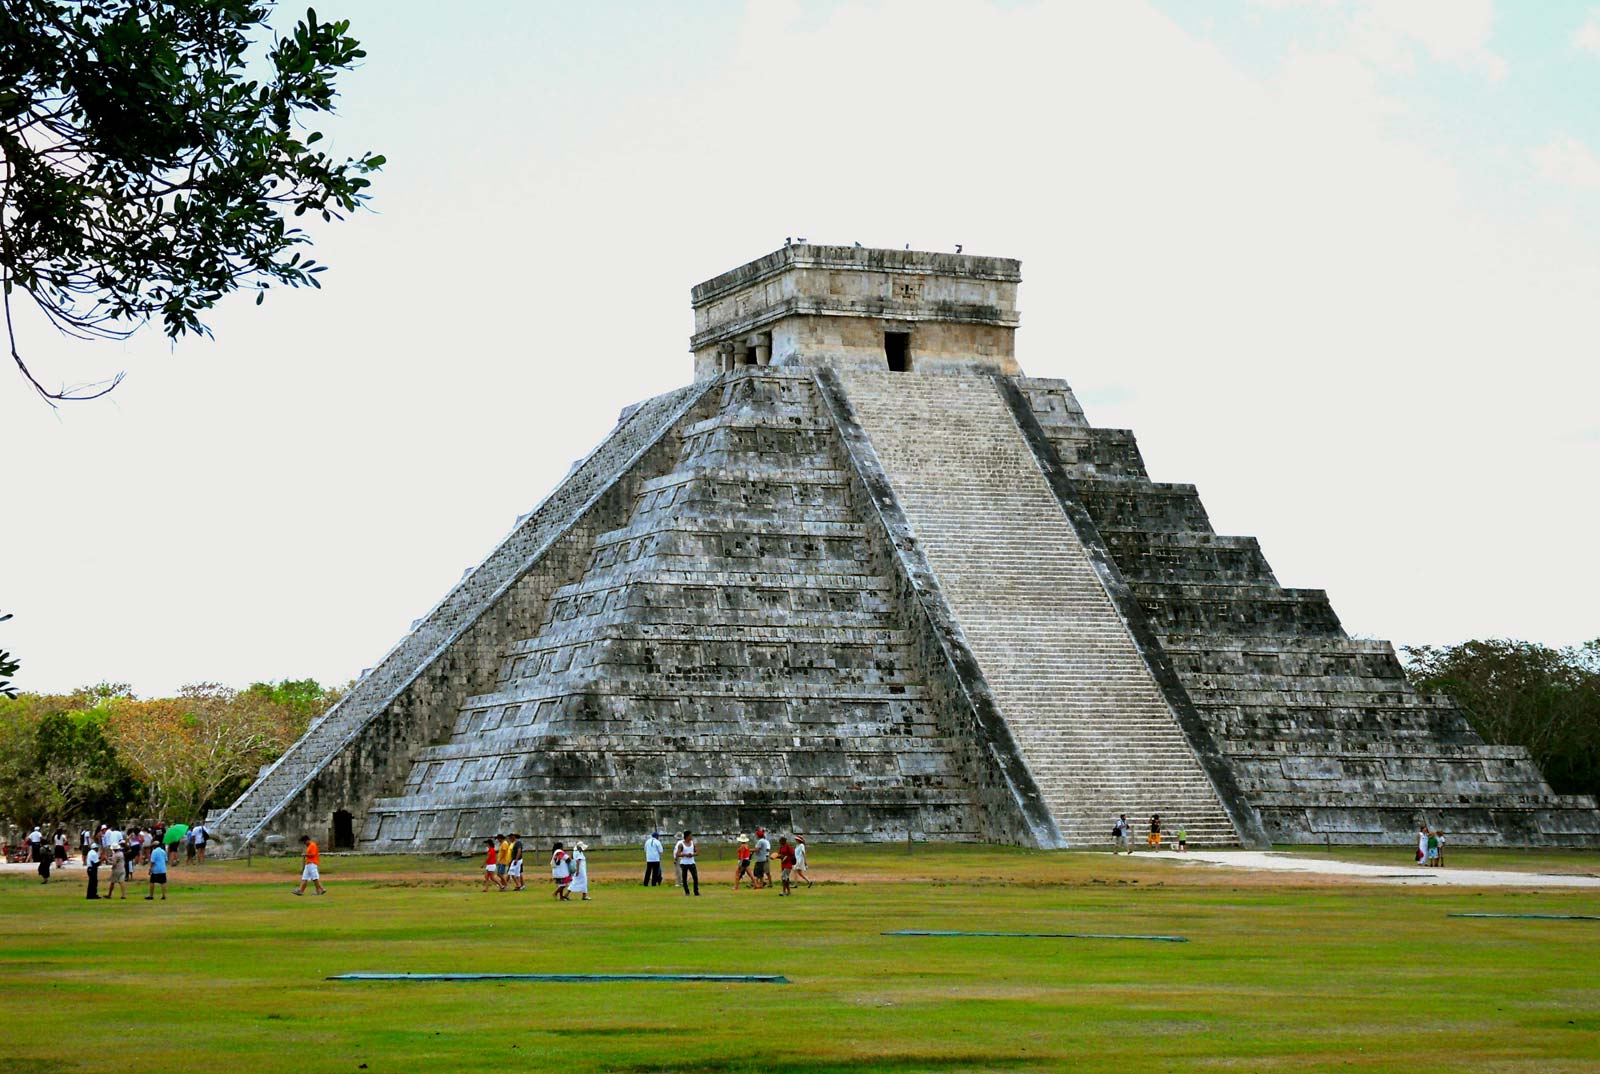 🗺 Most People Can’t Match 20/24 of These Famous Places to Their Country on a Map – Can You? Chichen Itza in Yucatan, Mexico